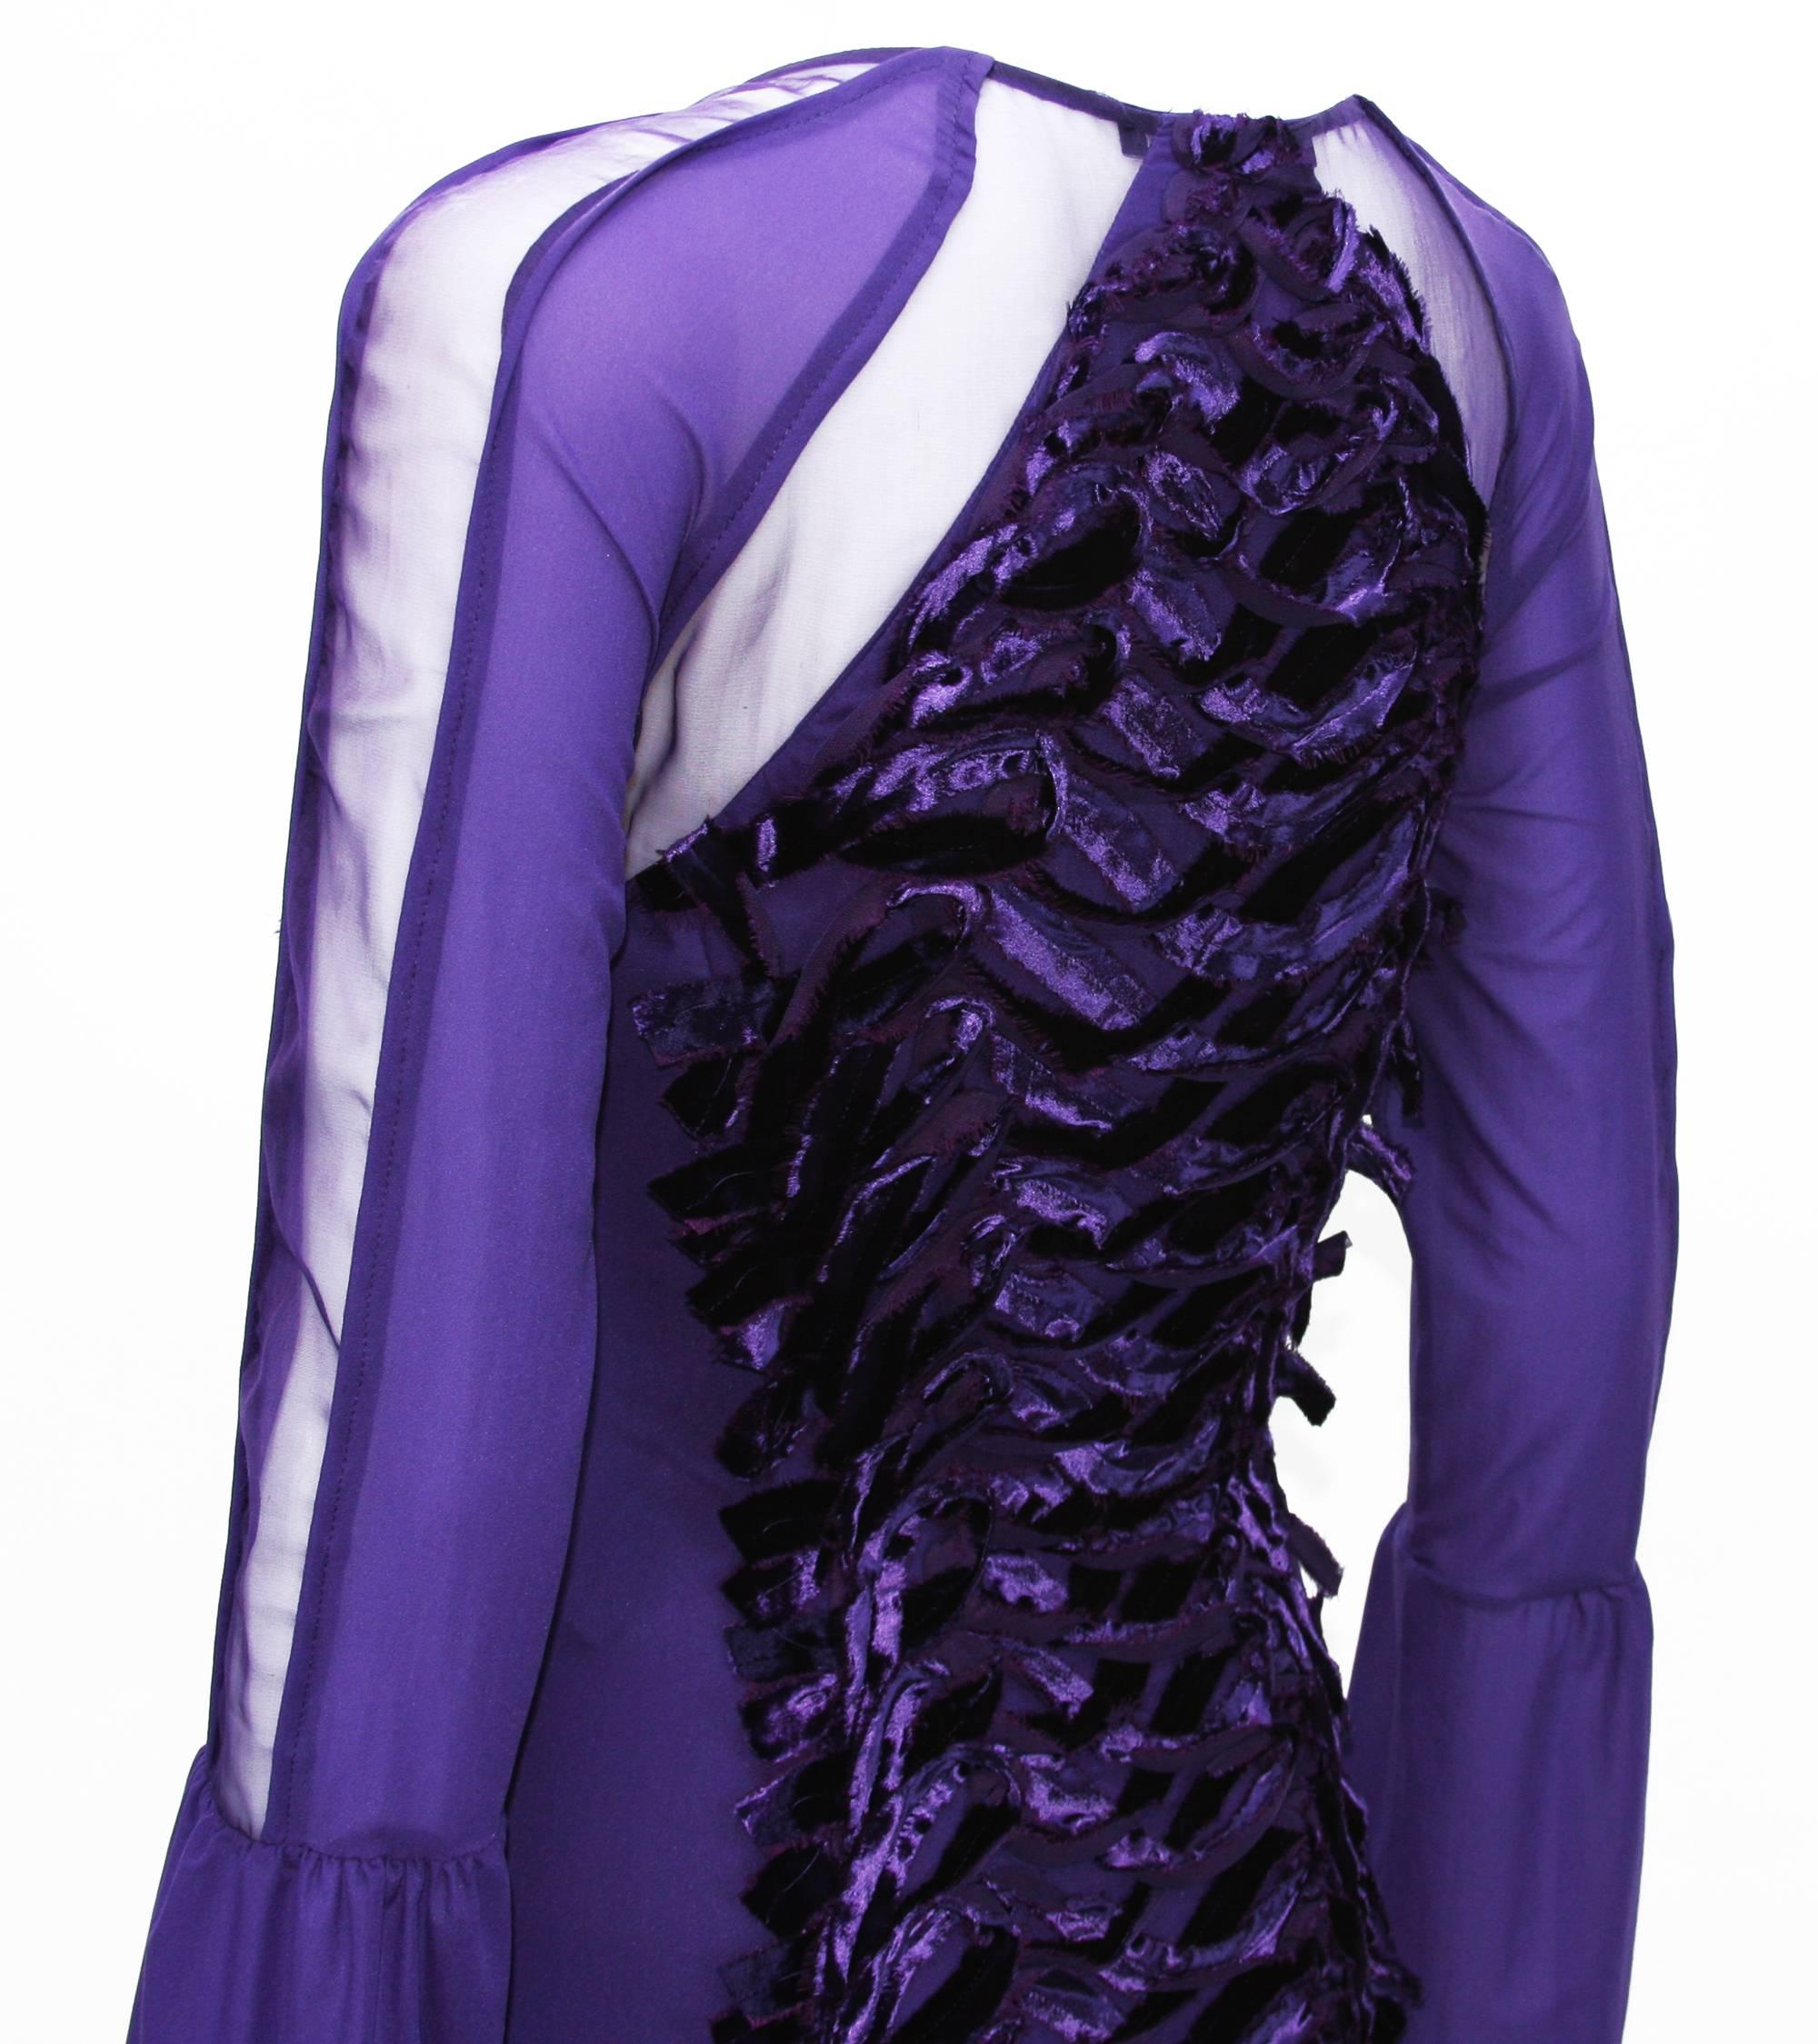 Women's TOM FORD for GUCCI F/W 2004 COLLECTION PURPLE VELVET STRETCH DRESS 40 - 4 For Sale